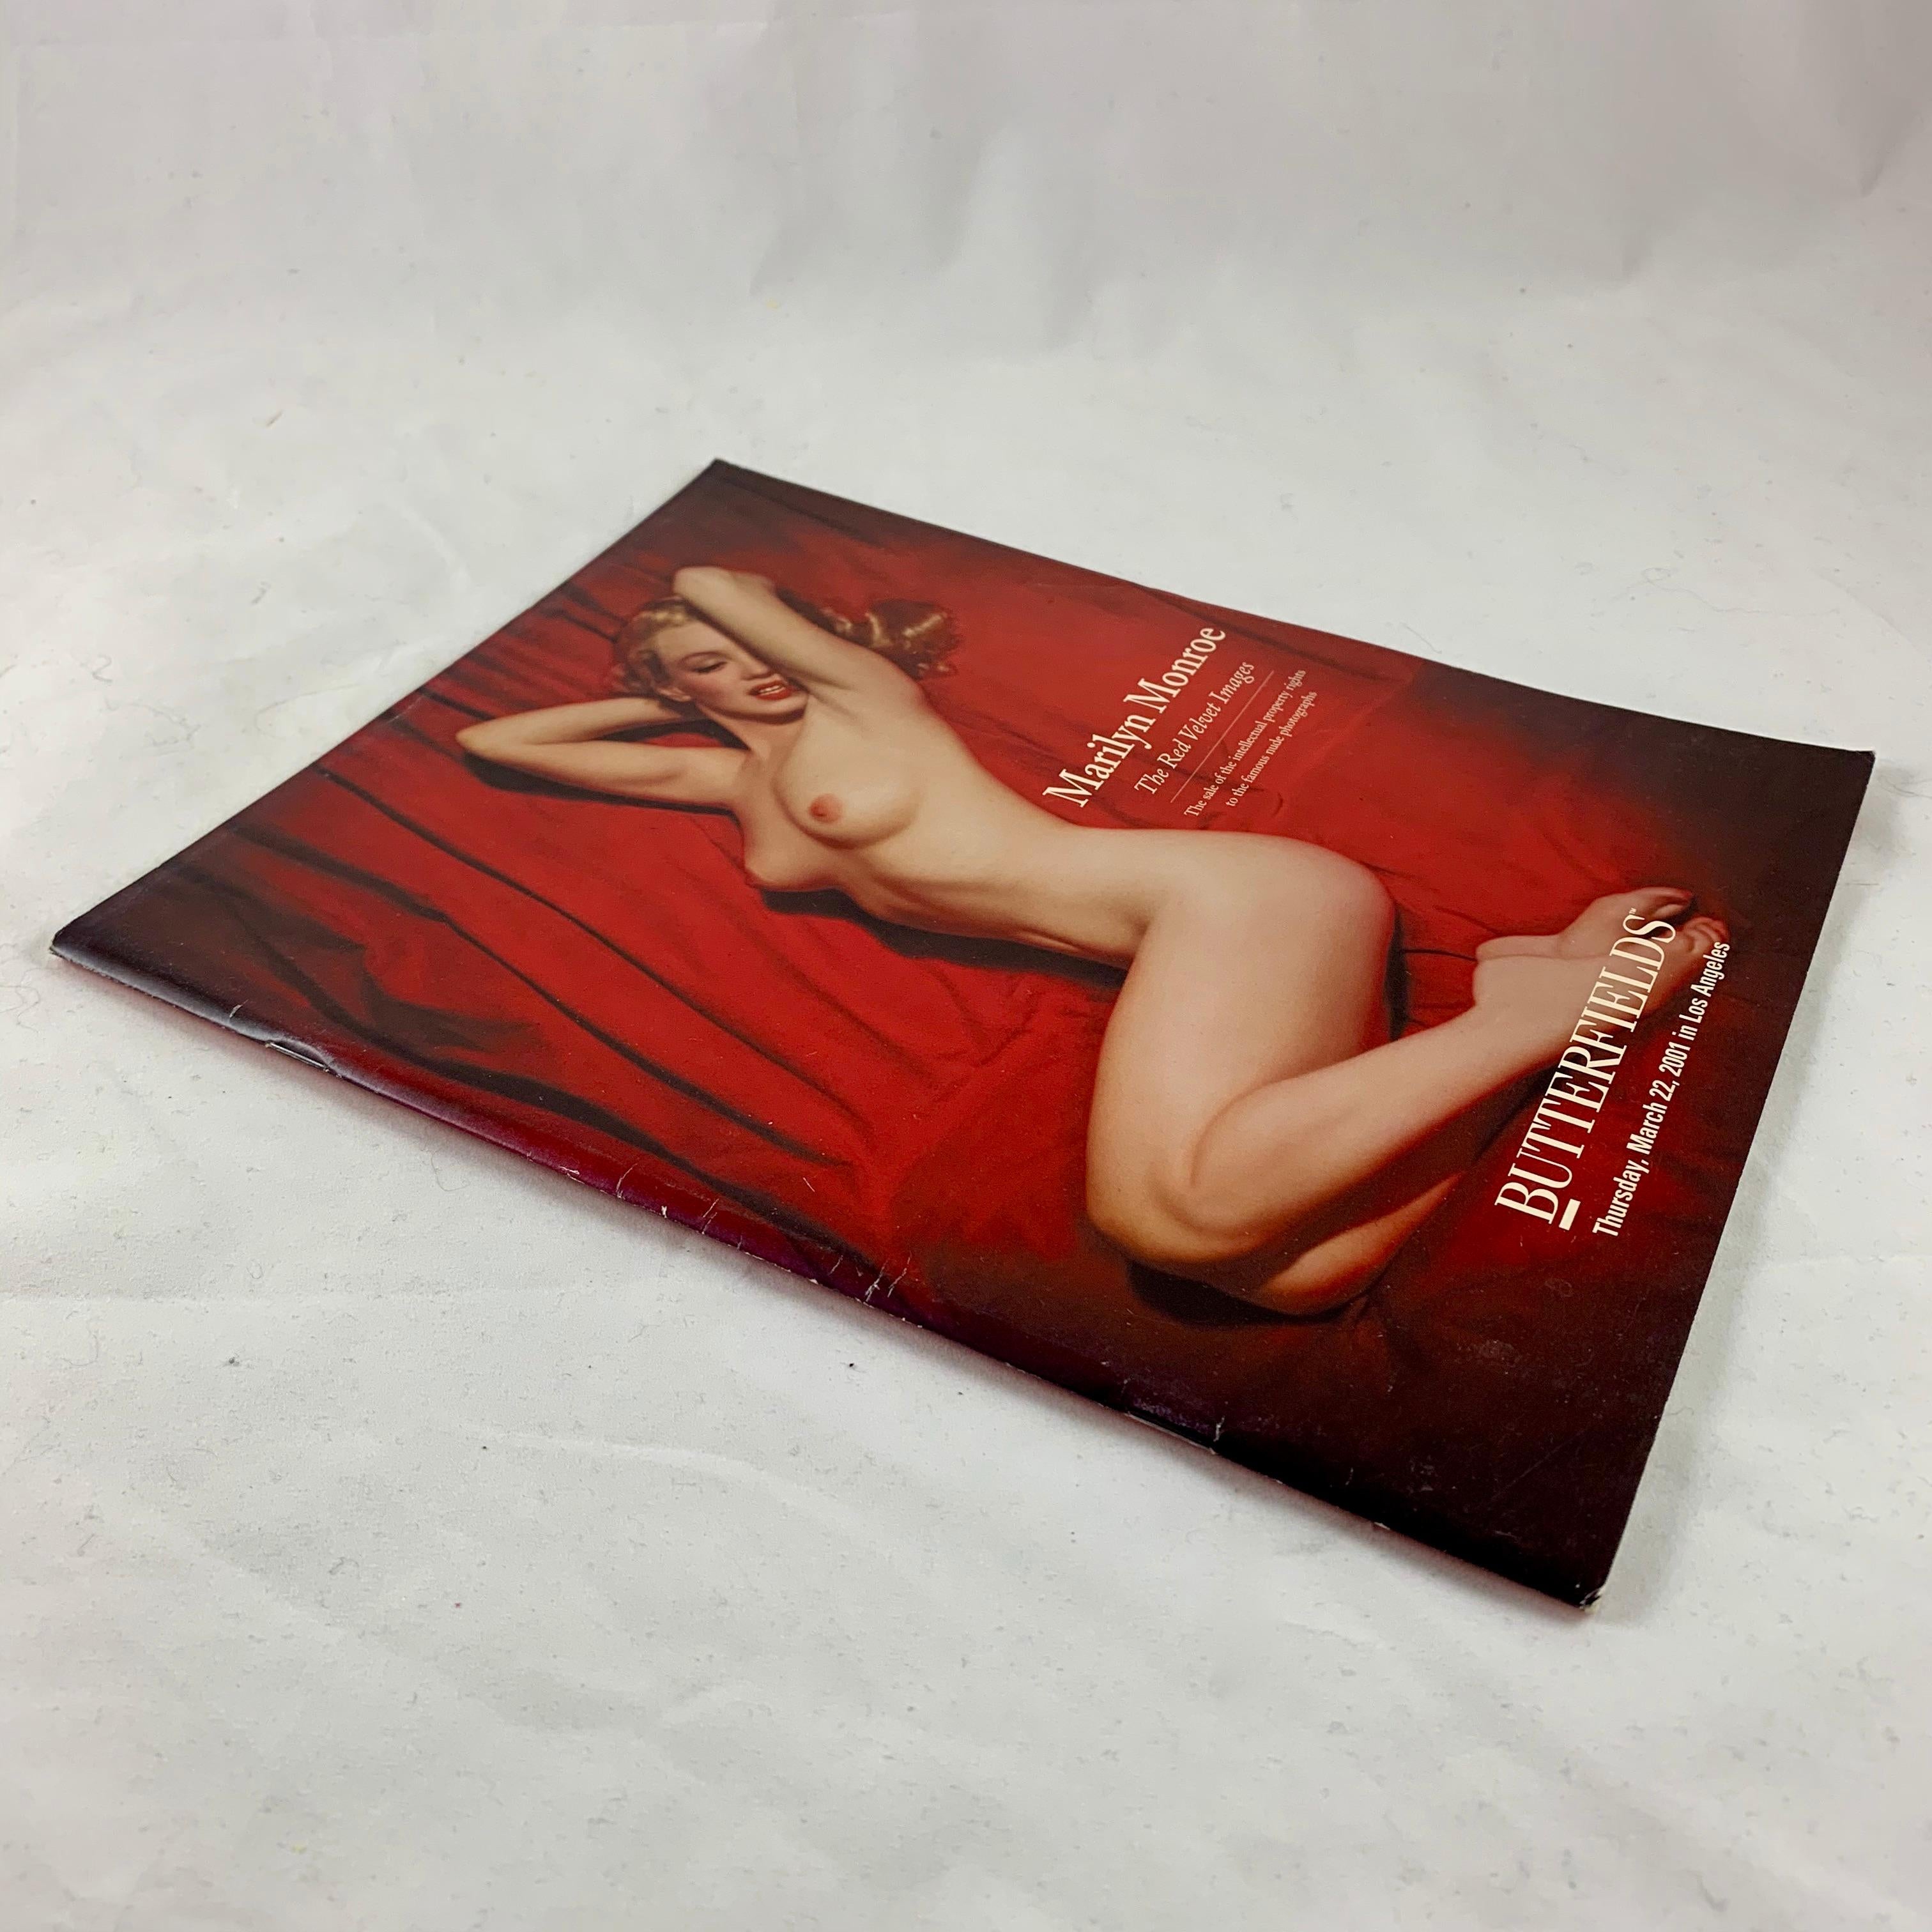 Butterfields Auction Catalogue, Marilyn Monroe, The Red Velvet Images, 2001 1